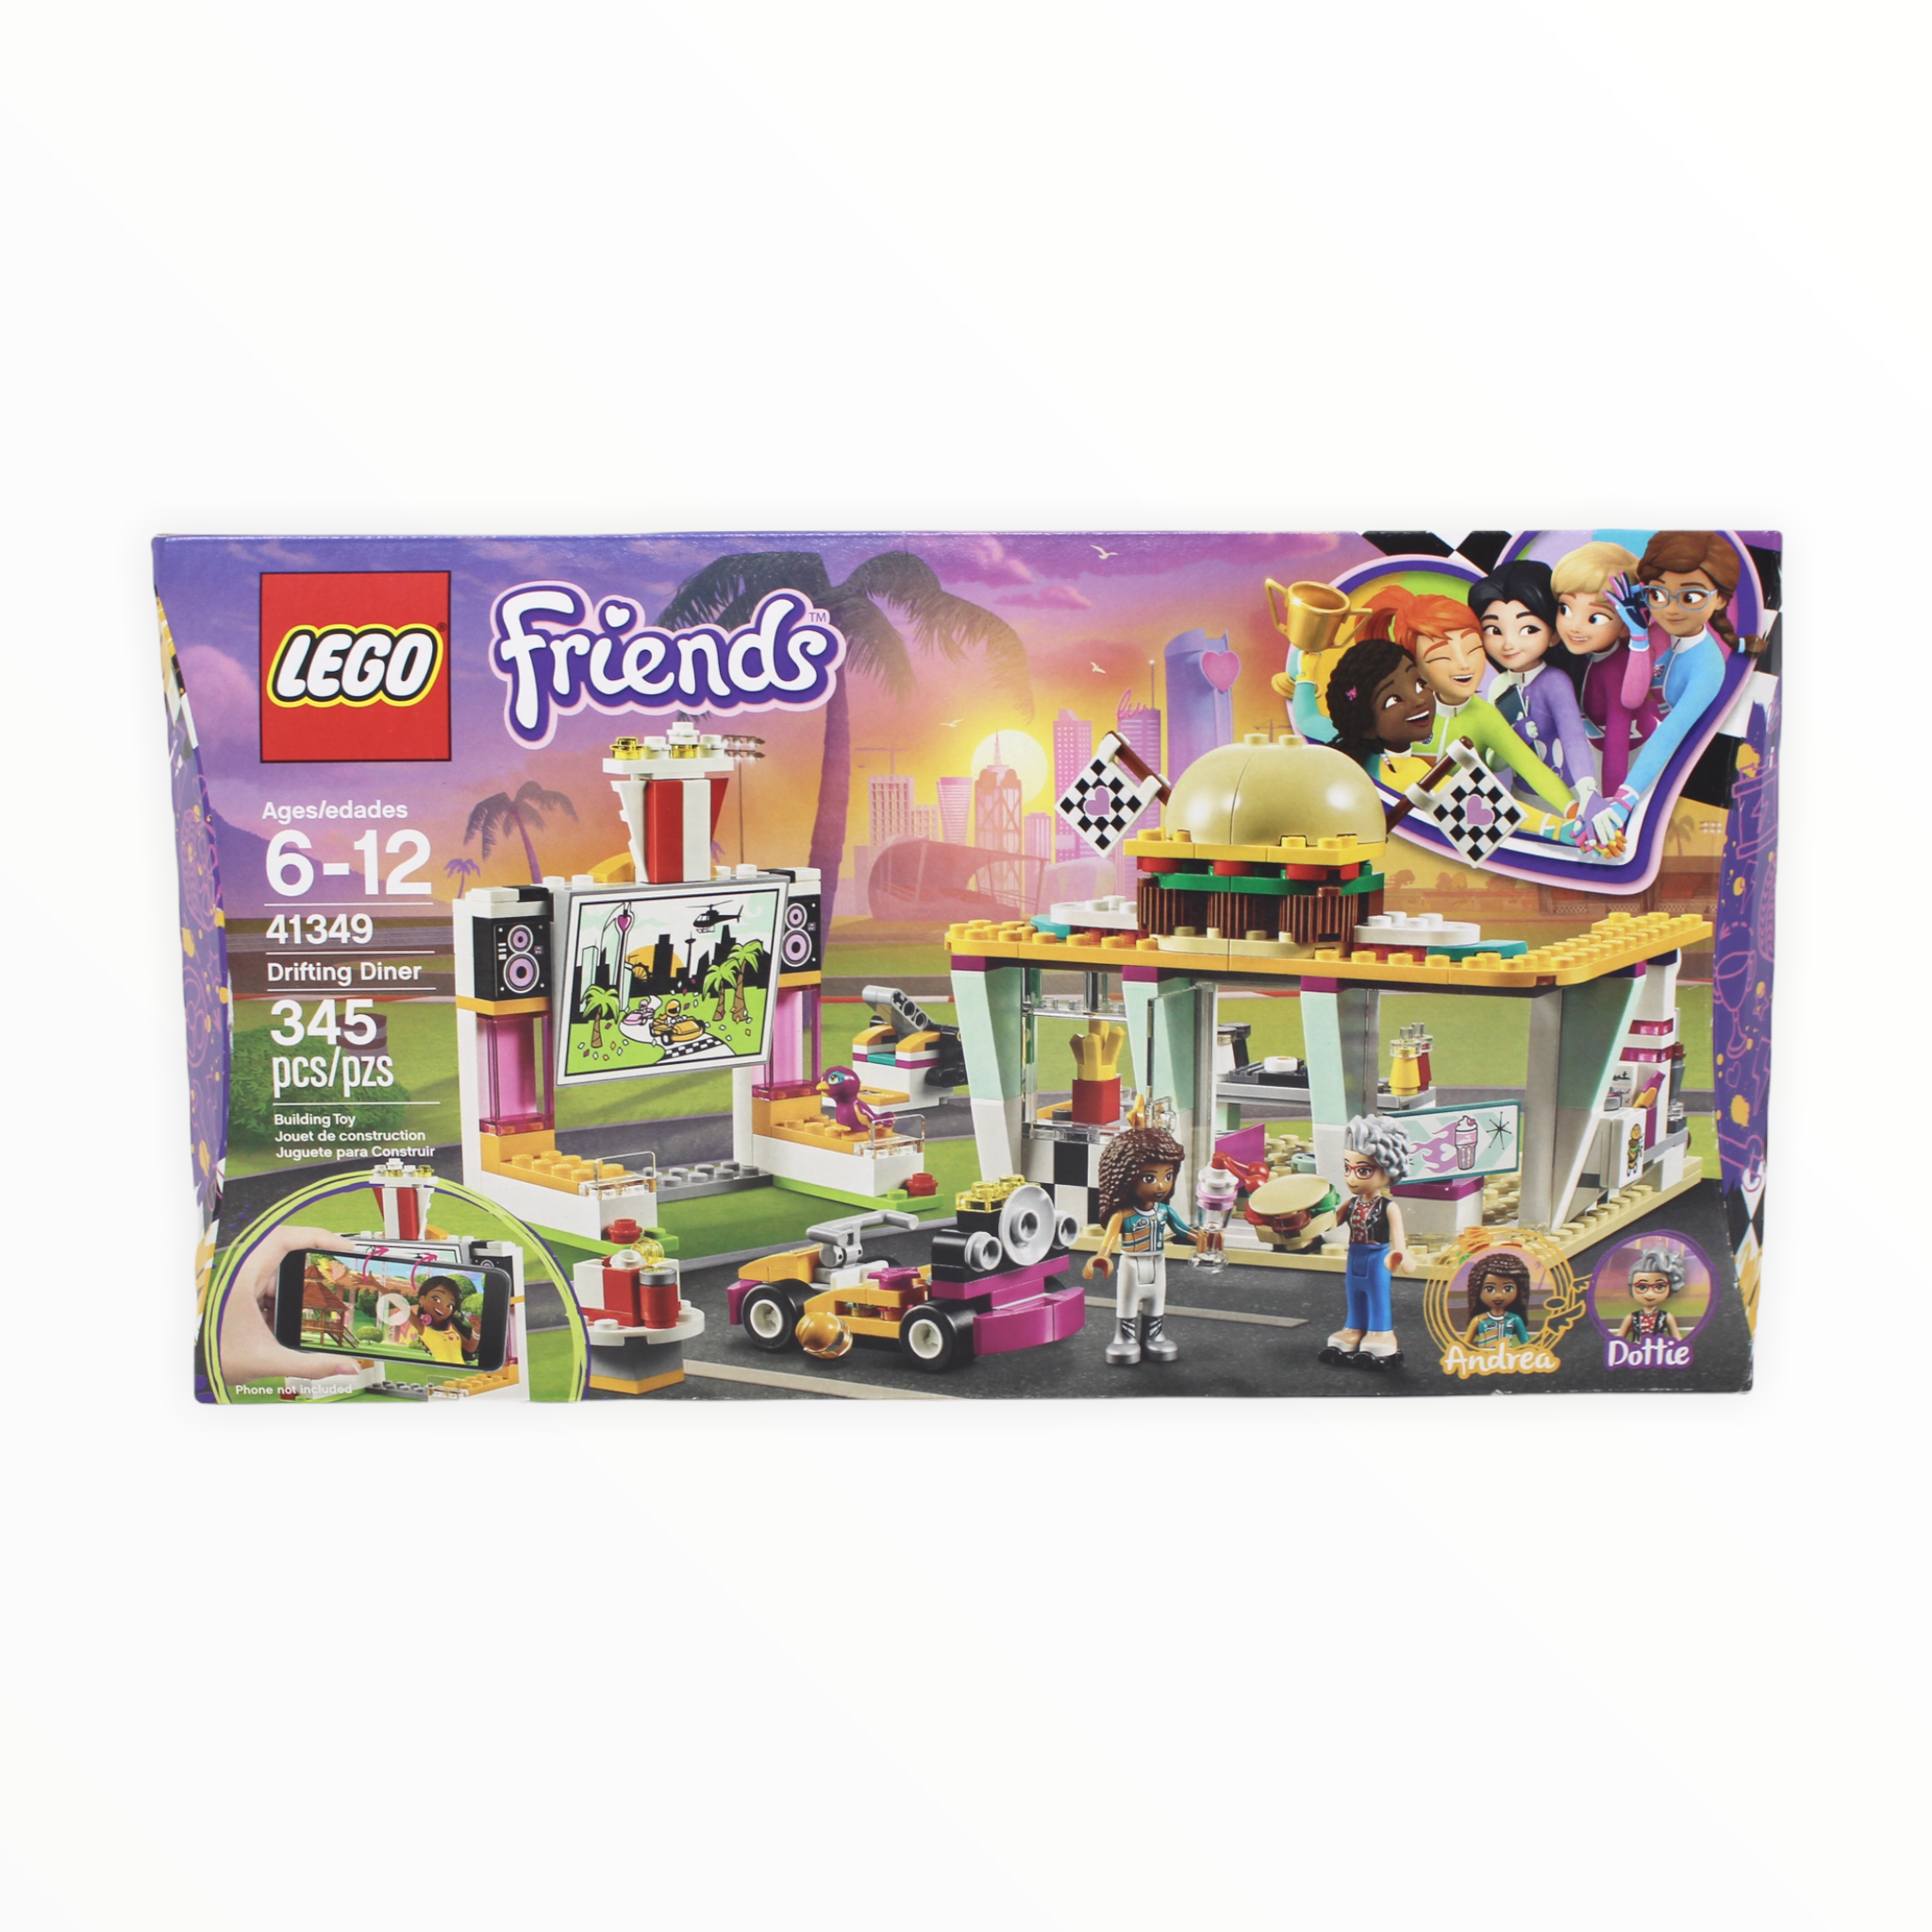 Certified Used Set 41349 Friends Drifting Diner